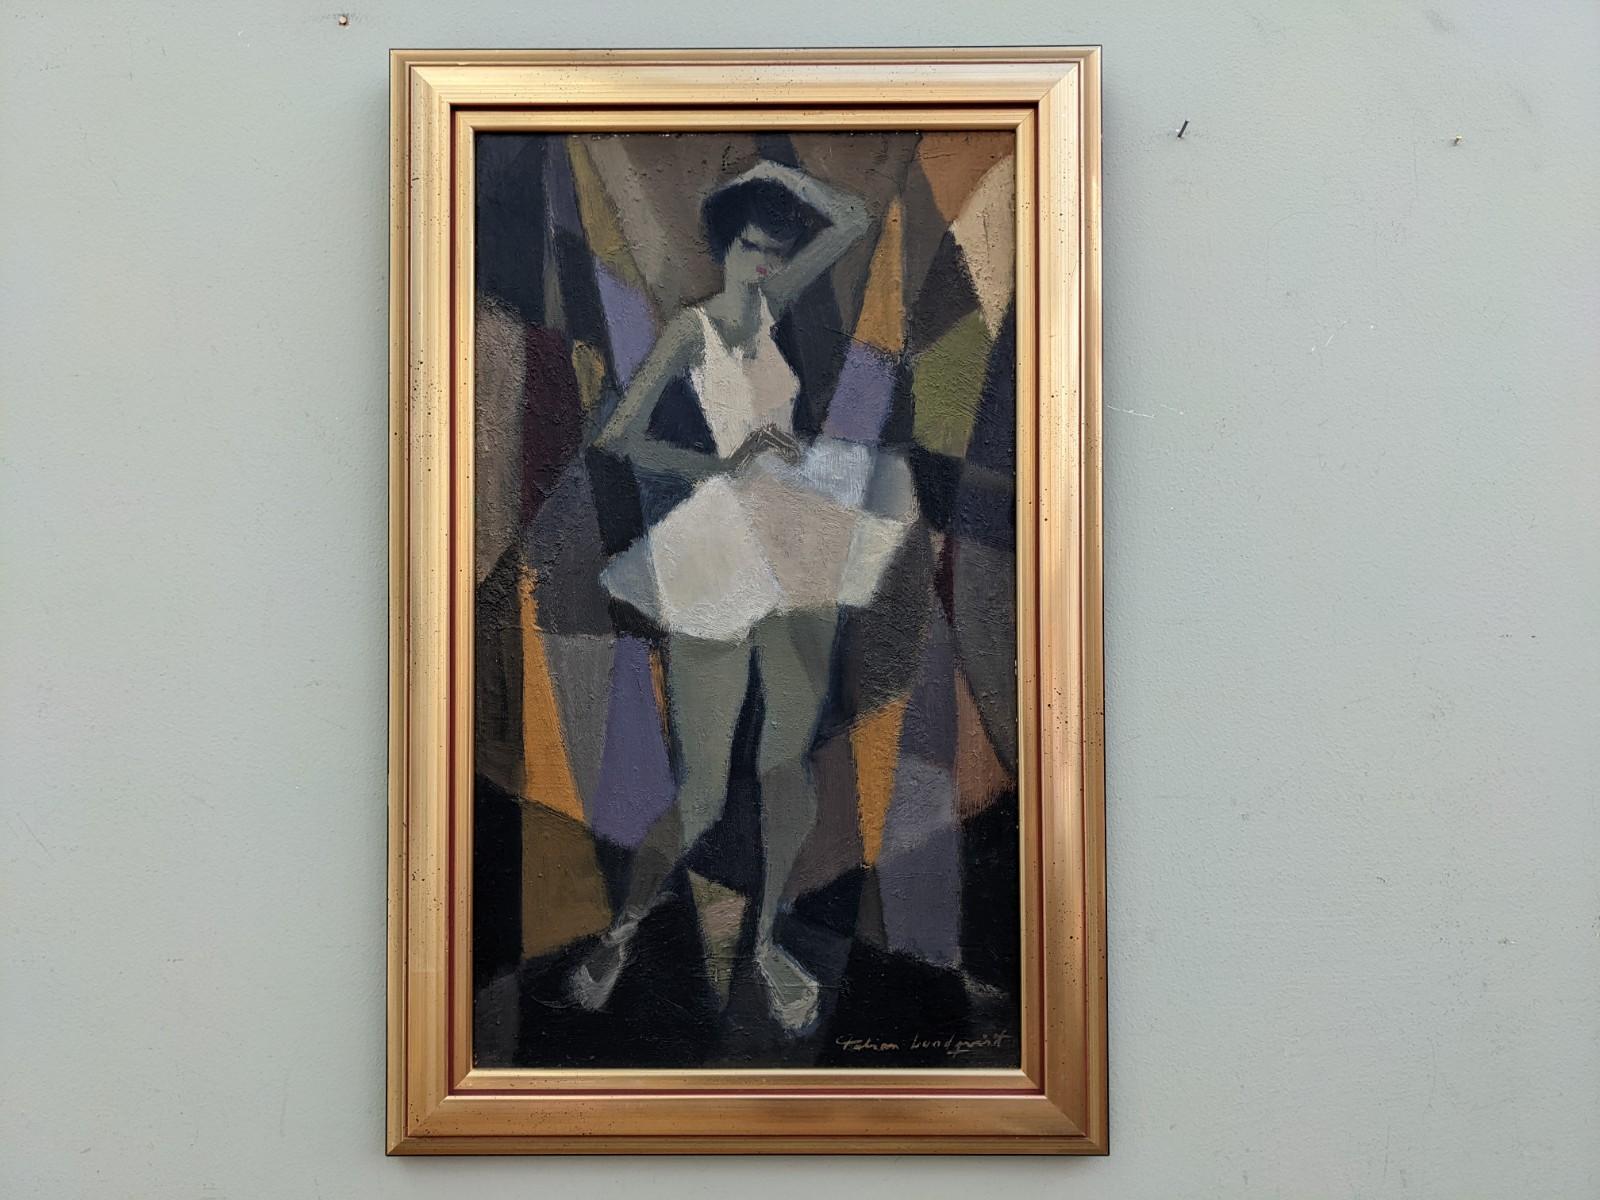 Unknown Figurative Painting - Mid-Century Modern Swedish Figurative Framed Oil Painting, "Cubist Dancer"